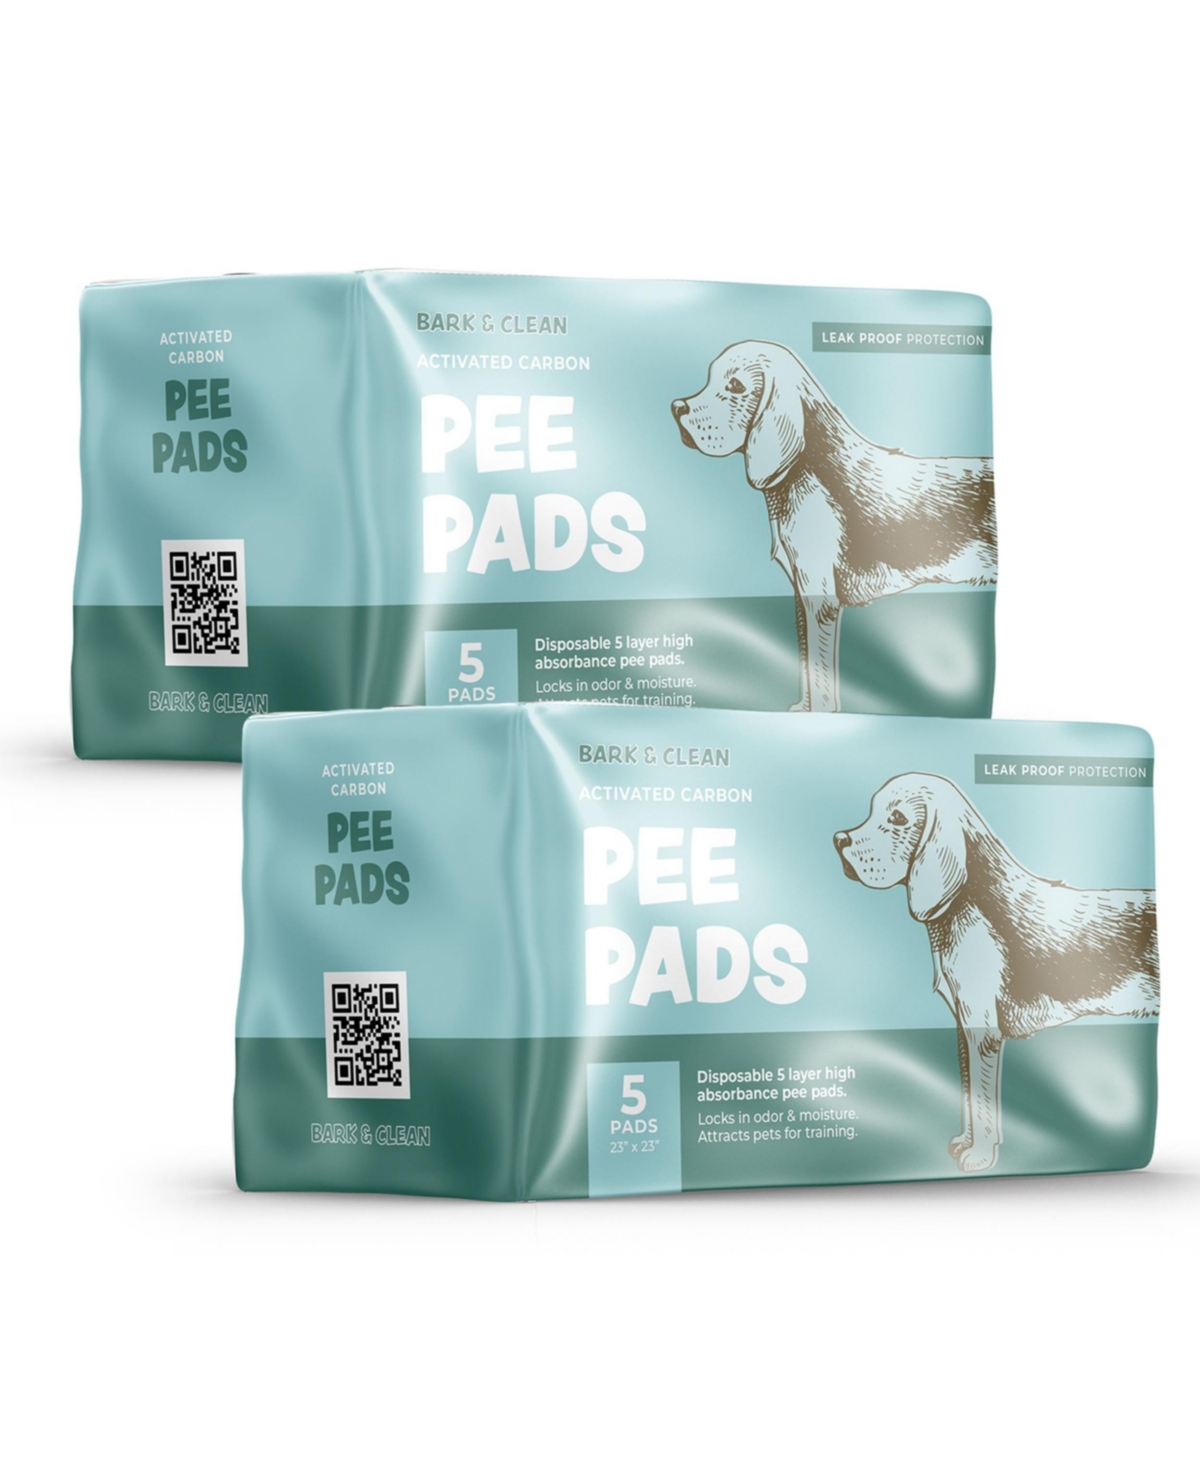 Traveler's Dog and Puppy Pee Pads, Leak-Proof Design, Heavy Duty Absorbency, 23" x 23", 2 Packs of 5 Pads - Charcoal